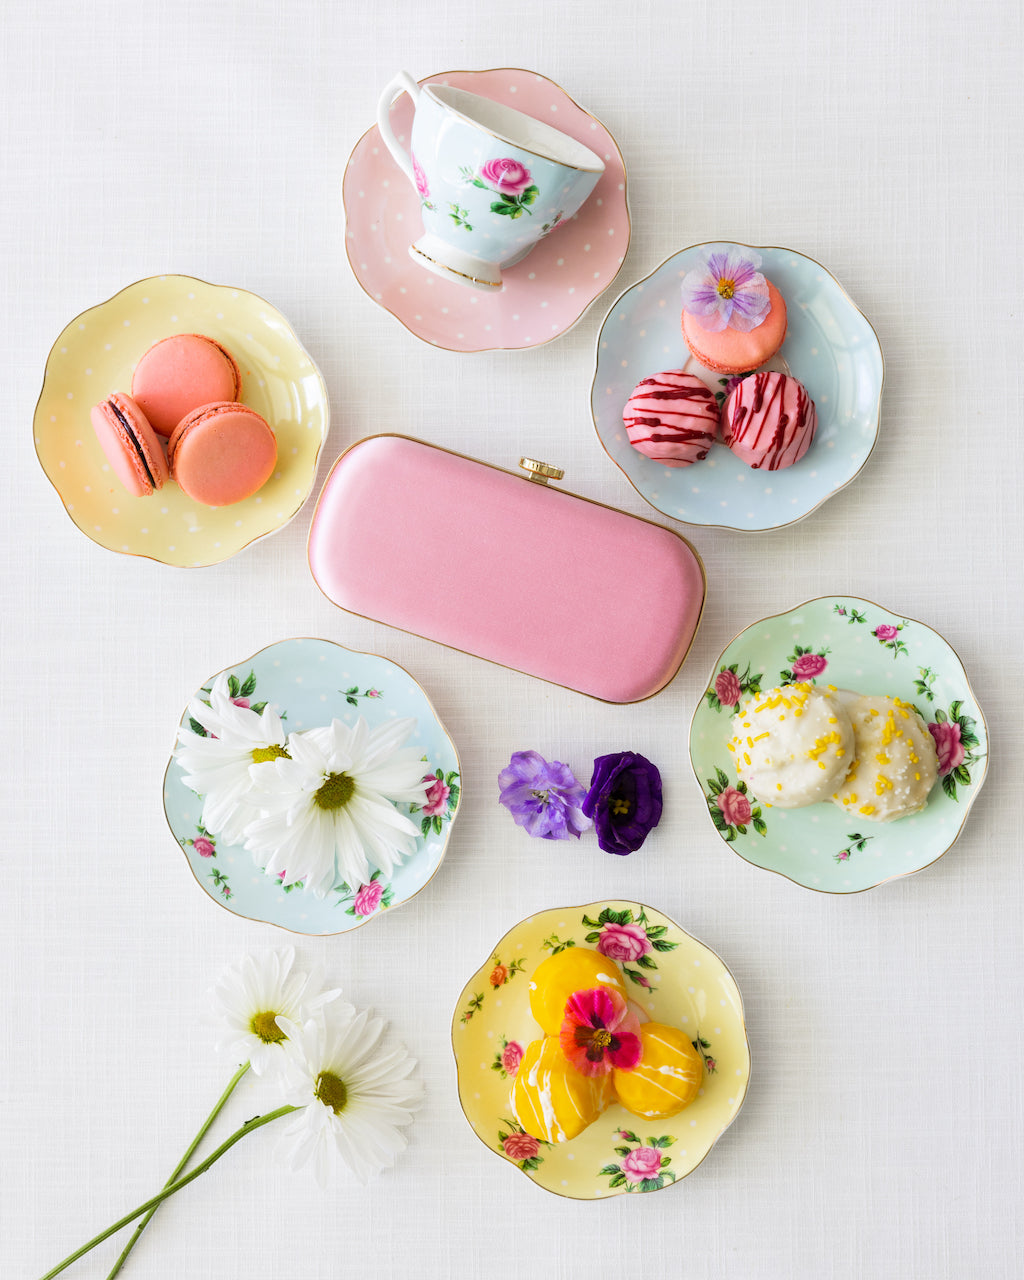 An array of pastel-colored plates with assorted desserts, a Bella Clutch Pink Petite from The Bella Rosa Collection, and fresh flowers on a light background.